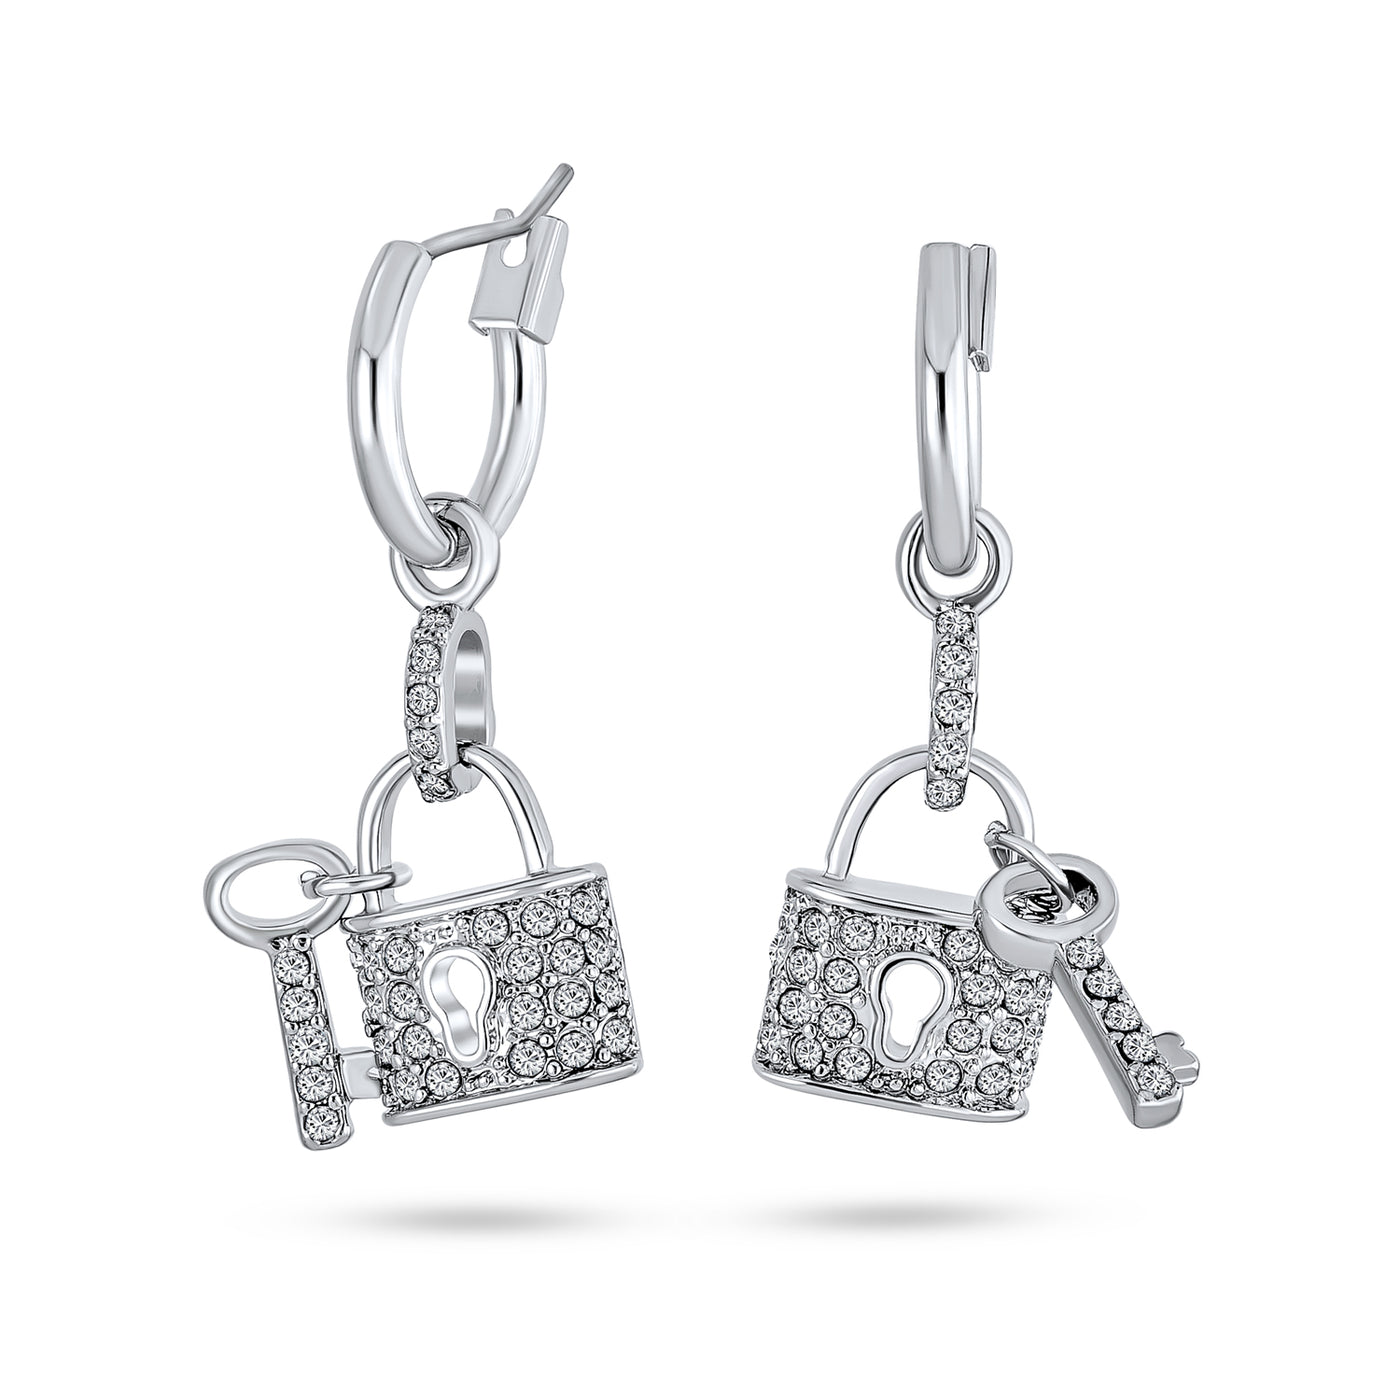 Partner In Crime Crystal Lock Charm Earrings Couples Silver Plated